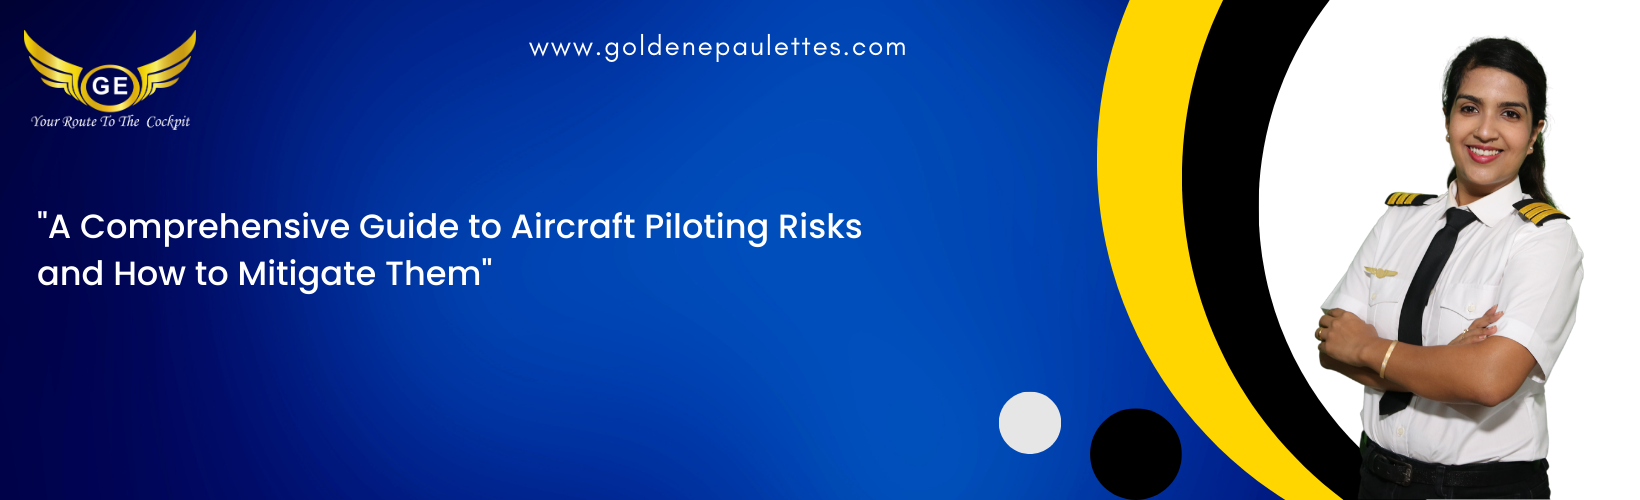 Understanding the Risks of Aircraft Piloting